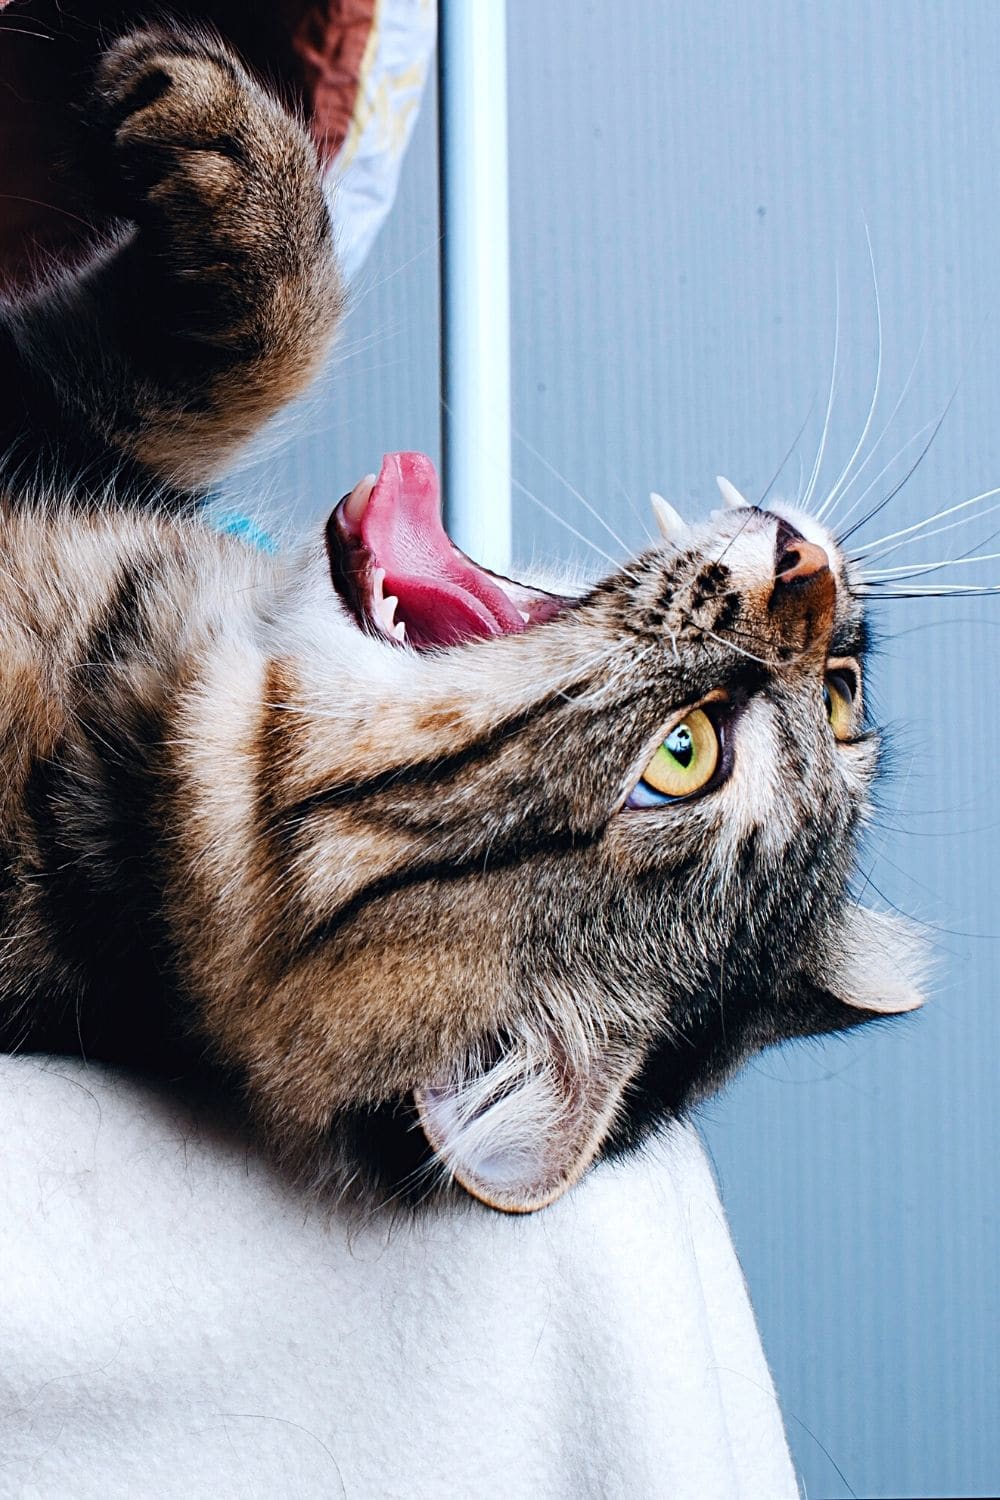 A cat in pain can express it through growling, especially when you touch that painful body part